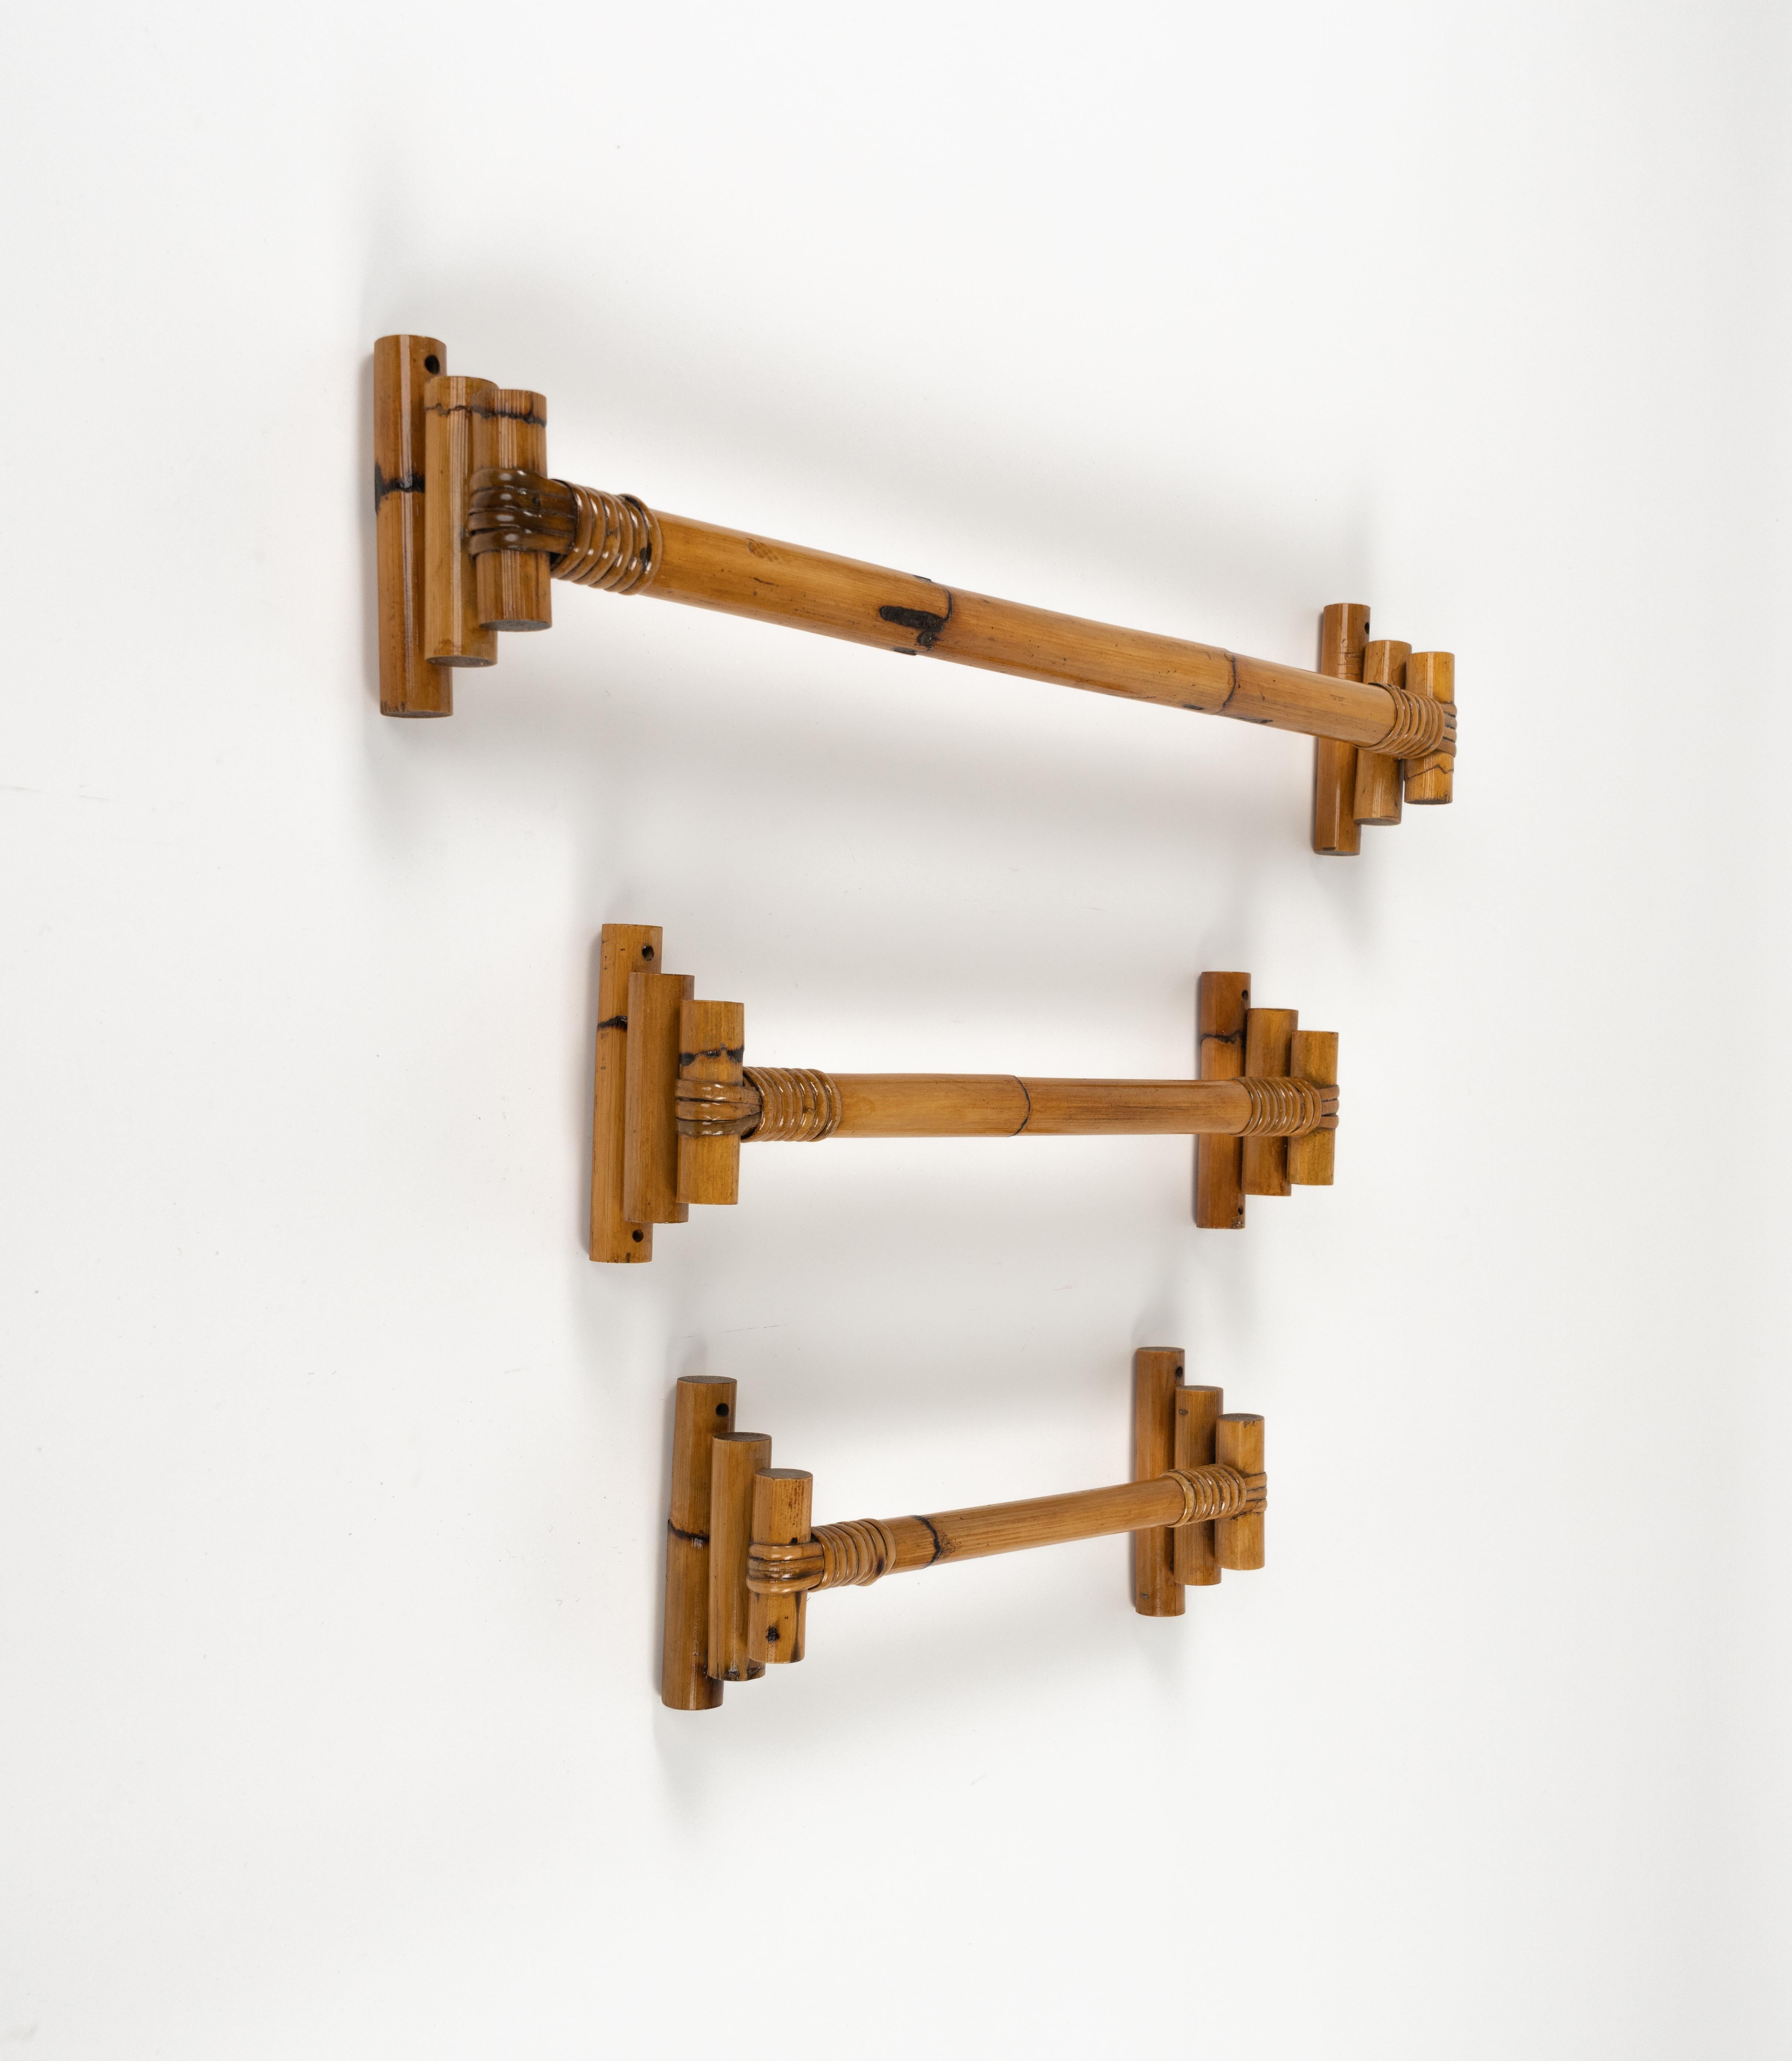 Midcentury Bathroom Set of Three Towel Holder in Bamboo and Rattan, Italy 1970s For Sale 1